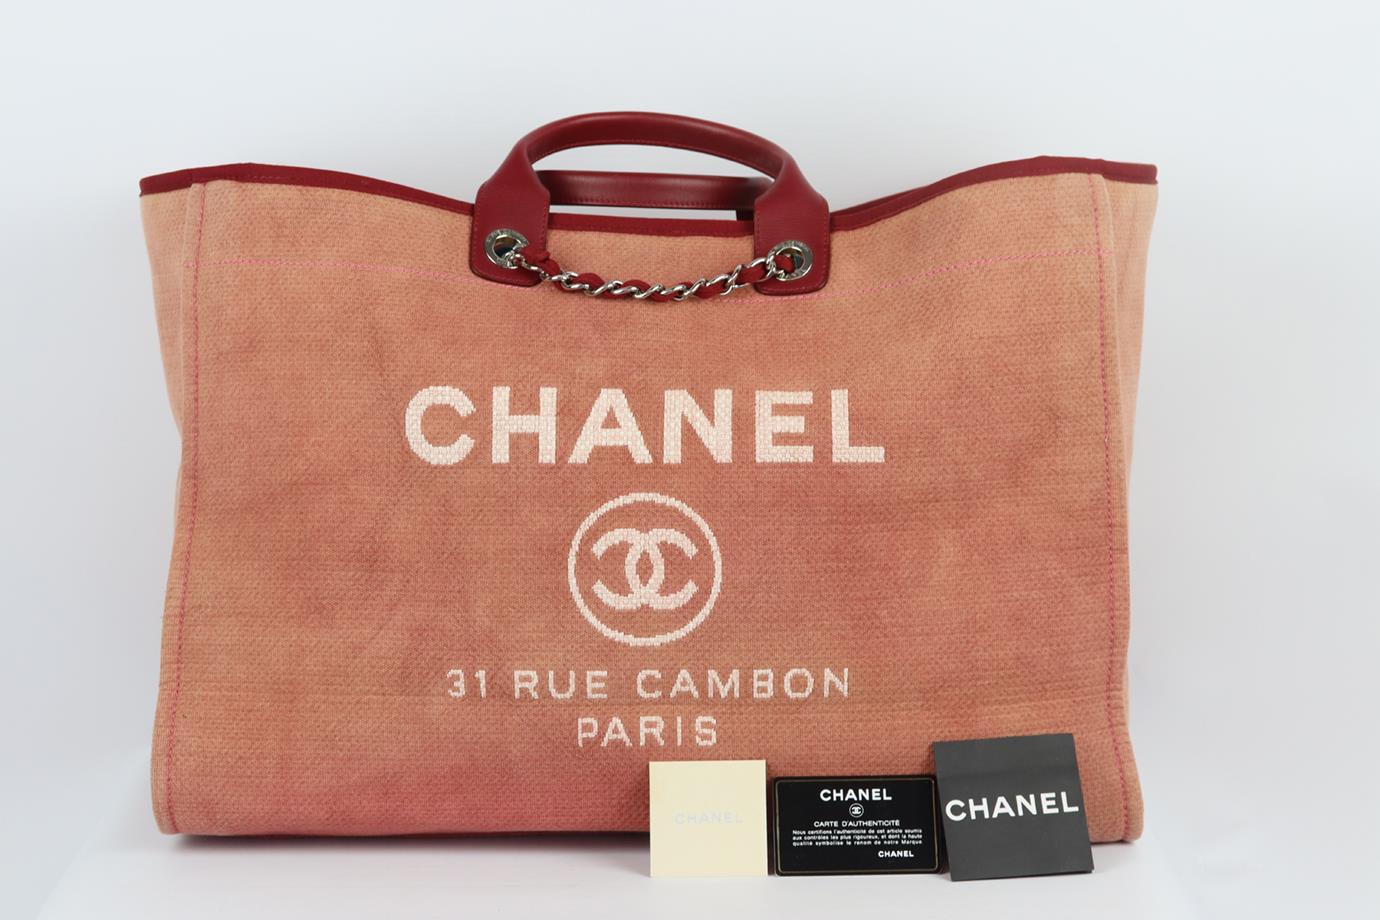 CHANEL 2012 DEAUVILLE EXTRA LARGE CANVAS AND LEATHER TOTE BAG